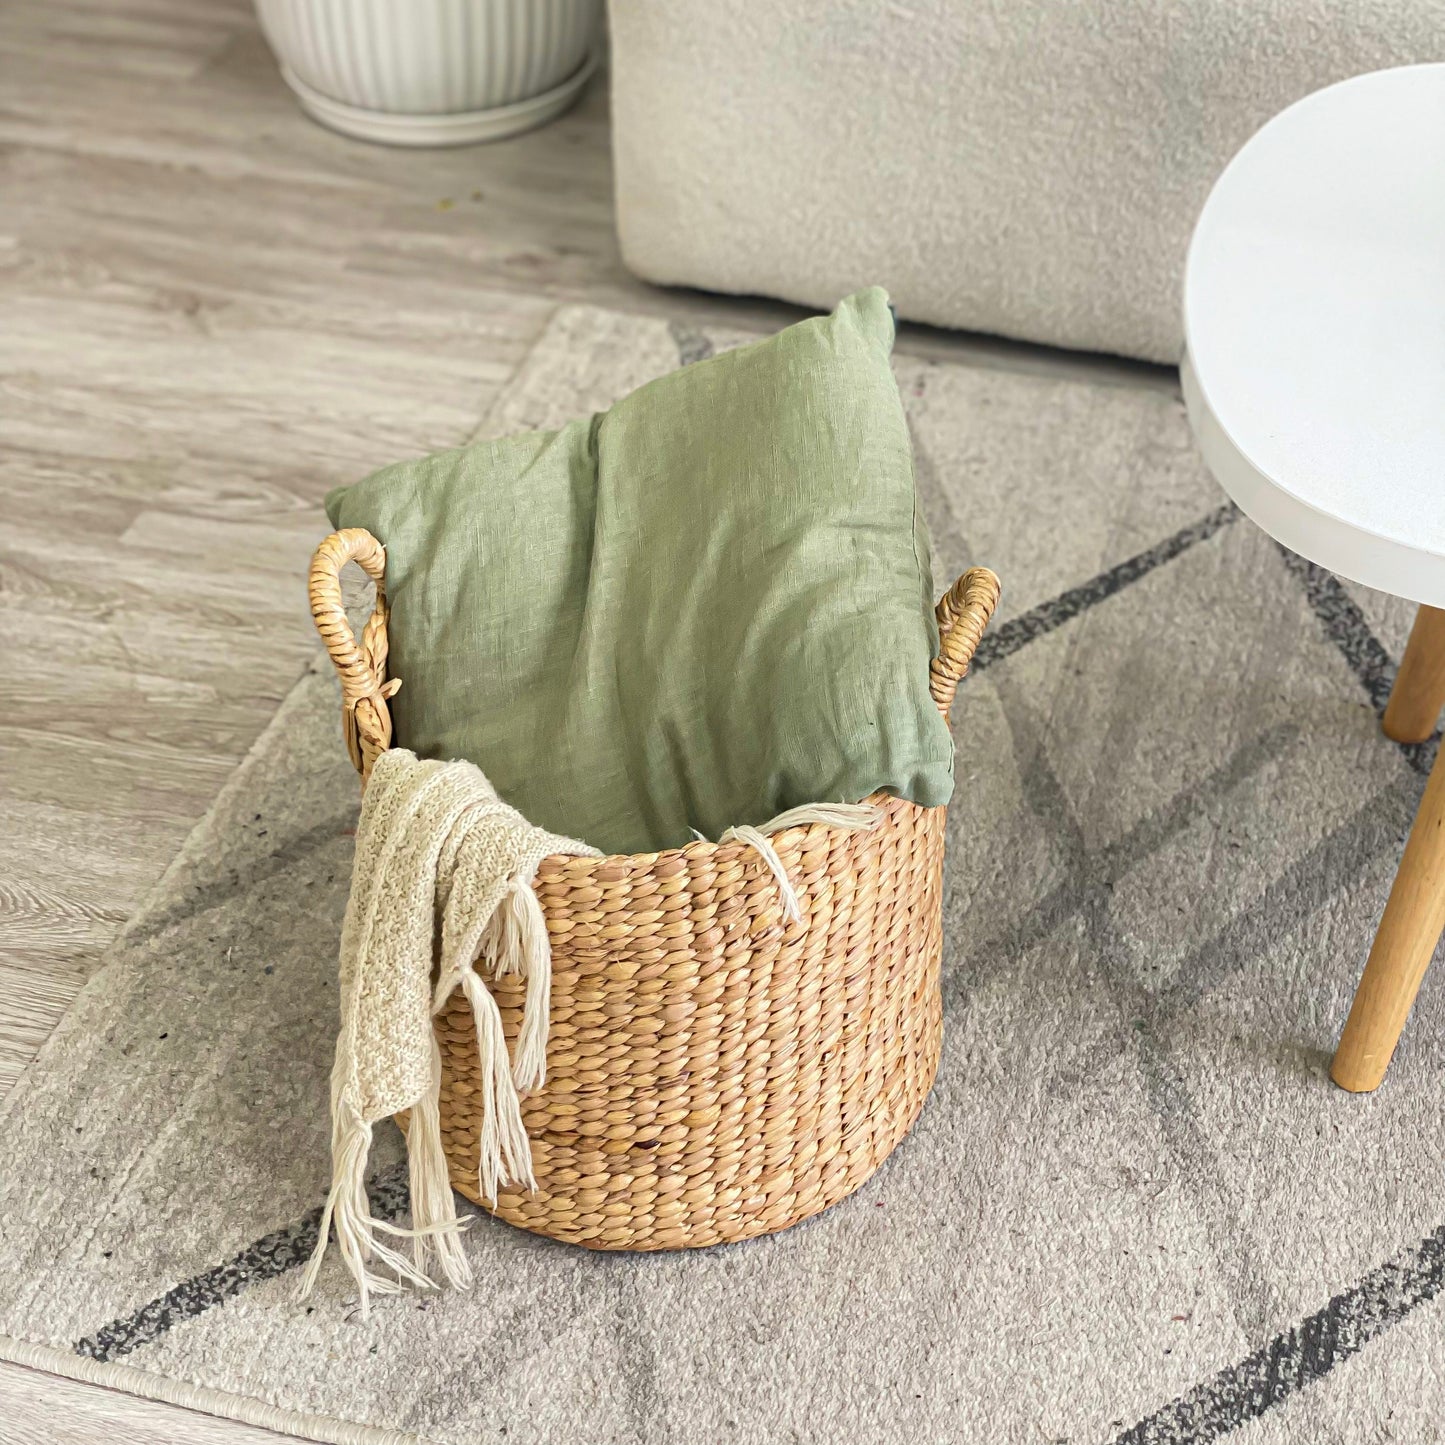 Baskets for blankets, sofa pillows